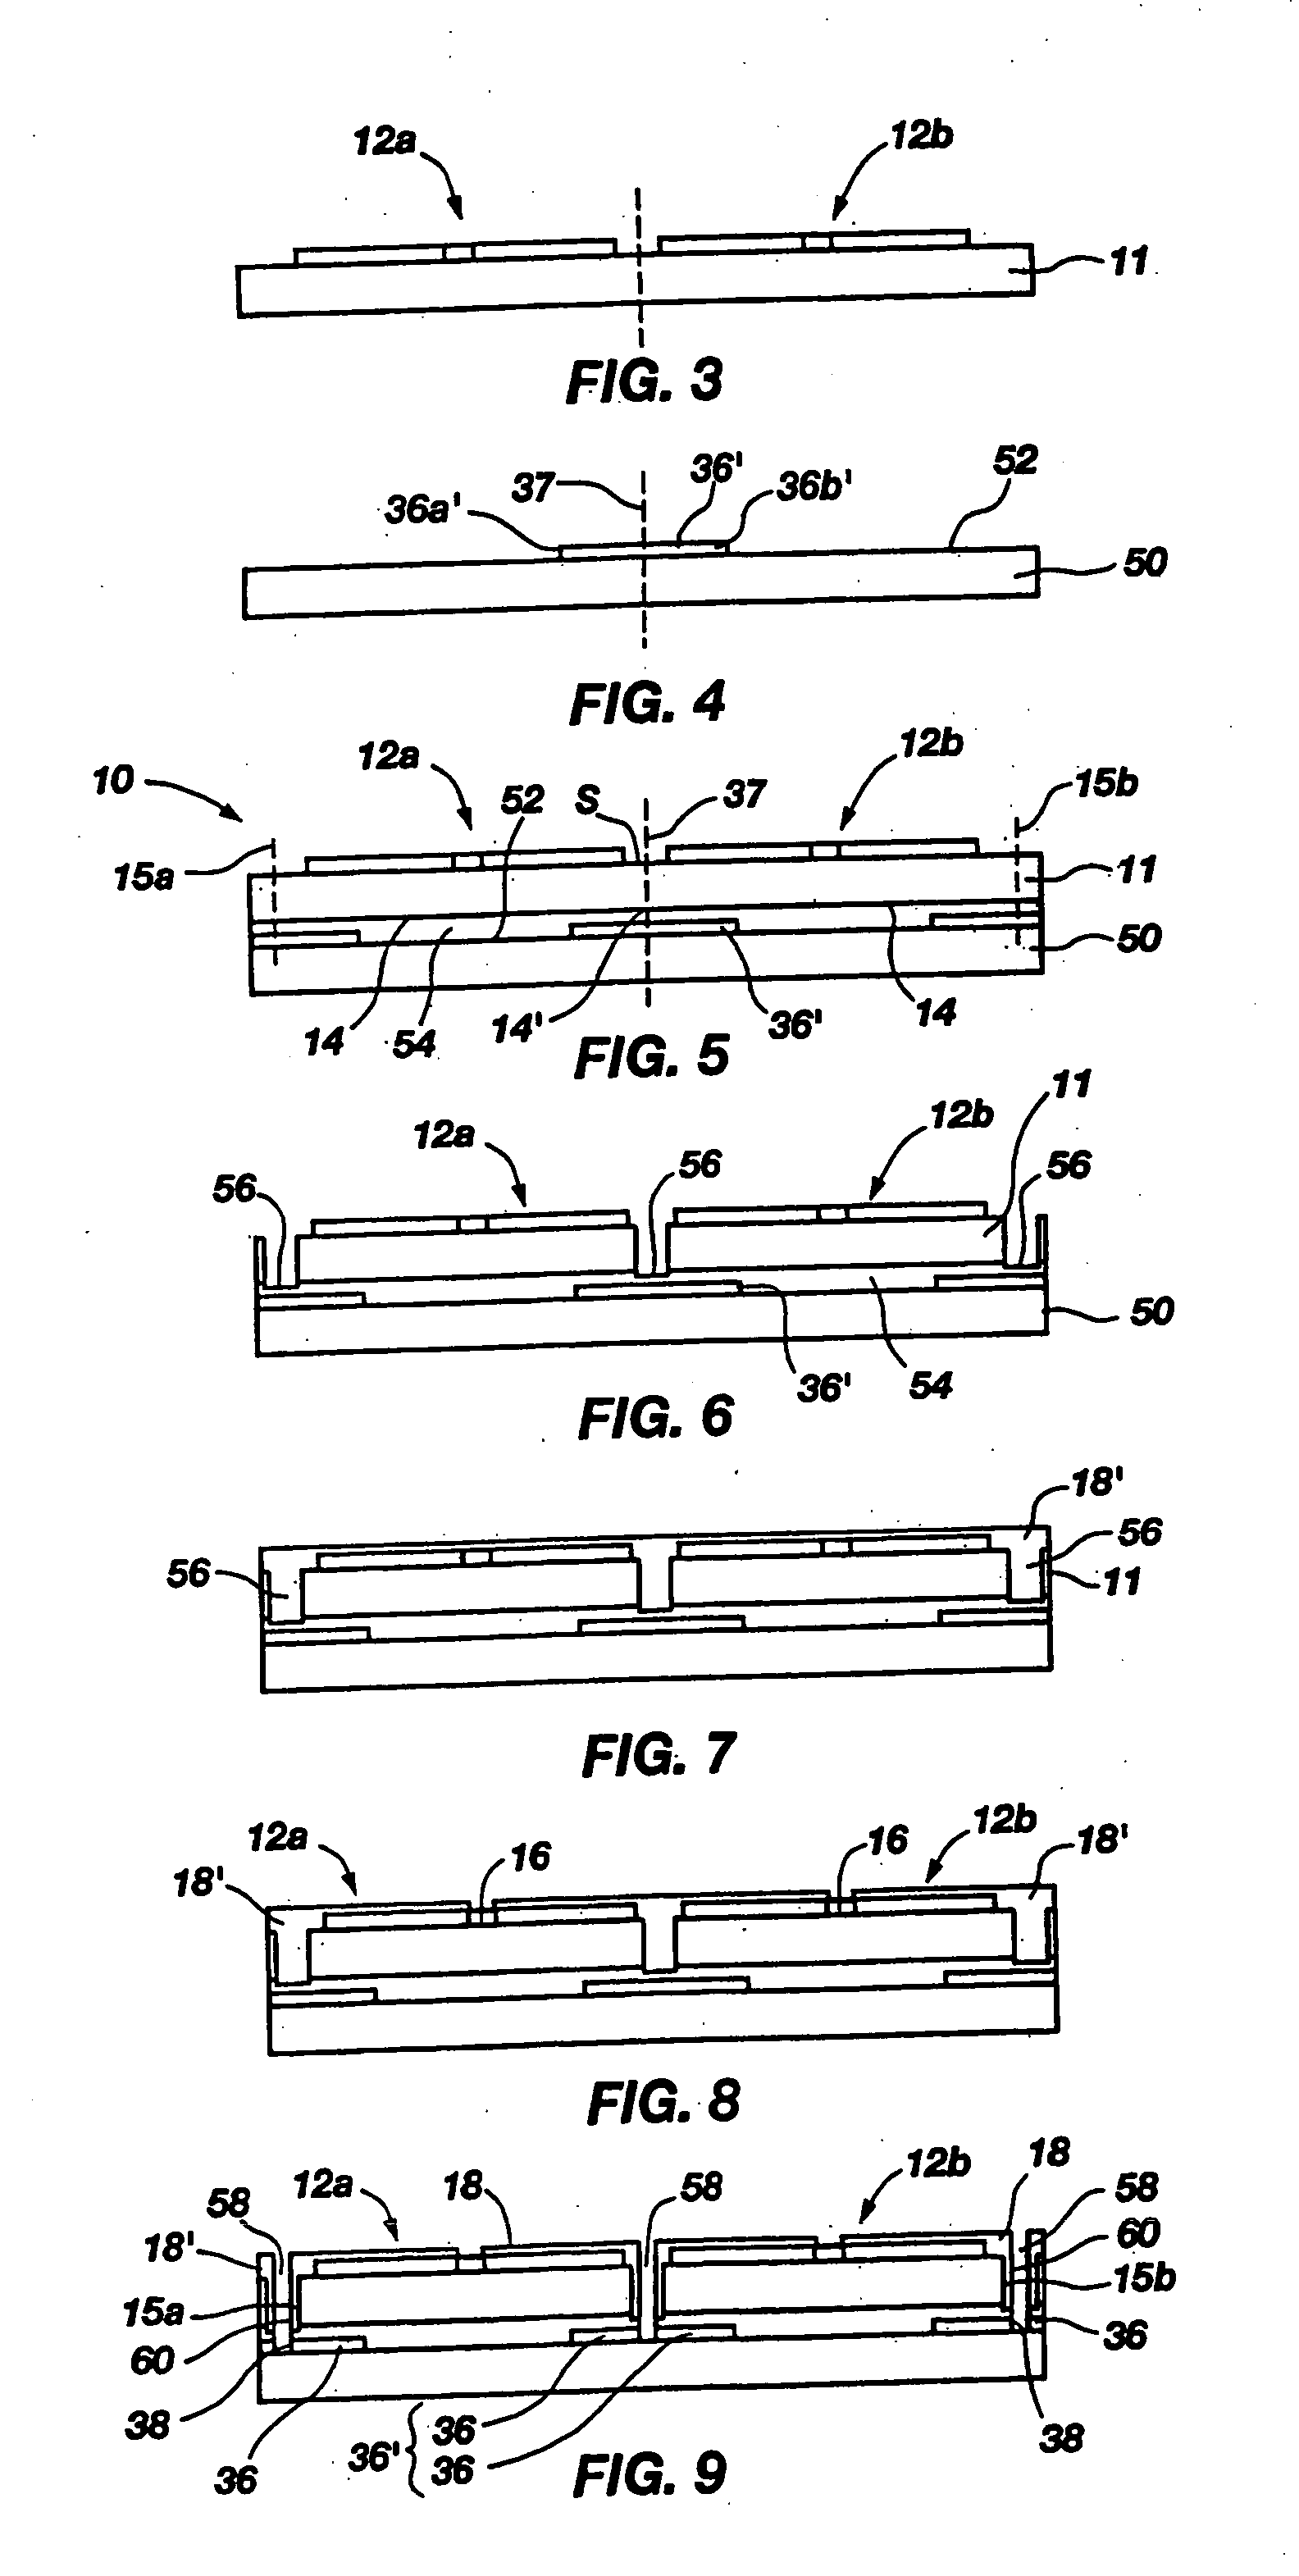 Castellated chip-scale packages and methods for fabricating the same